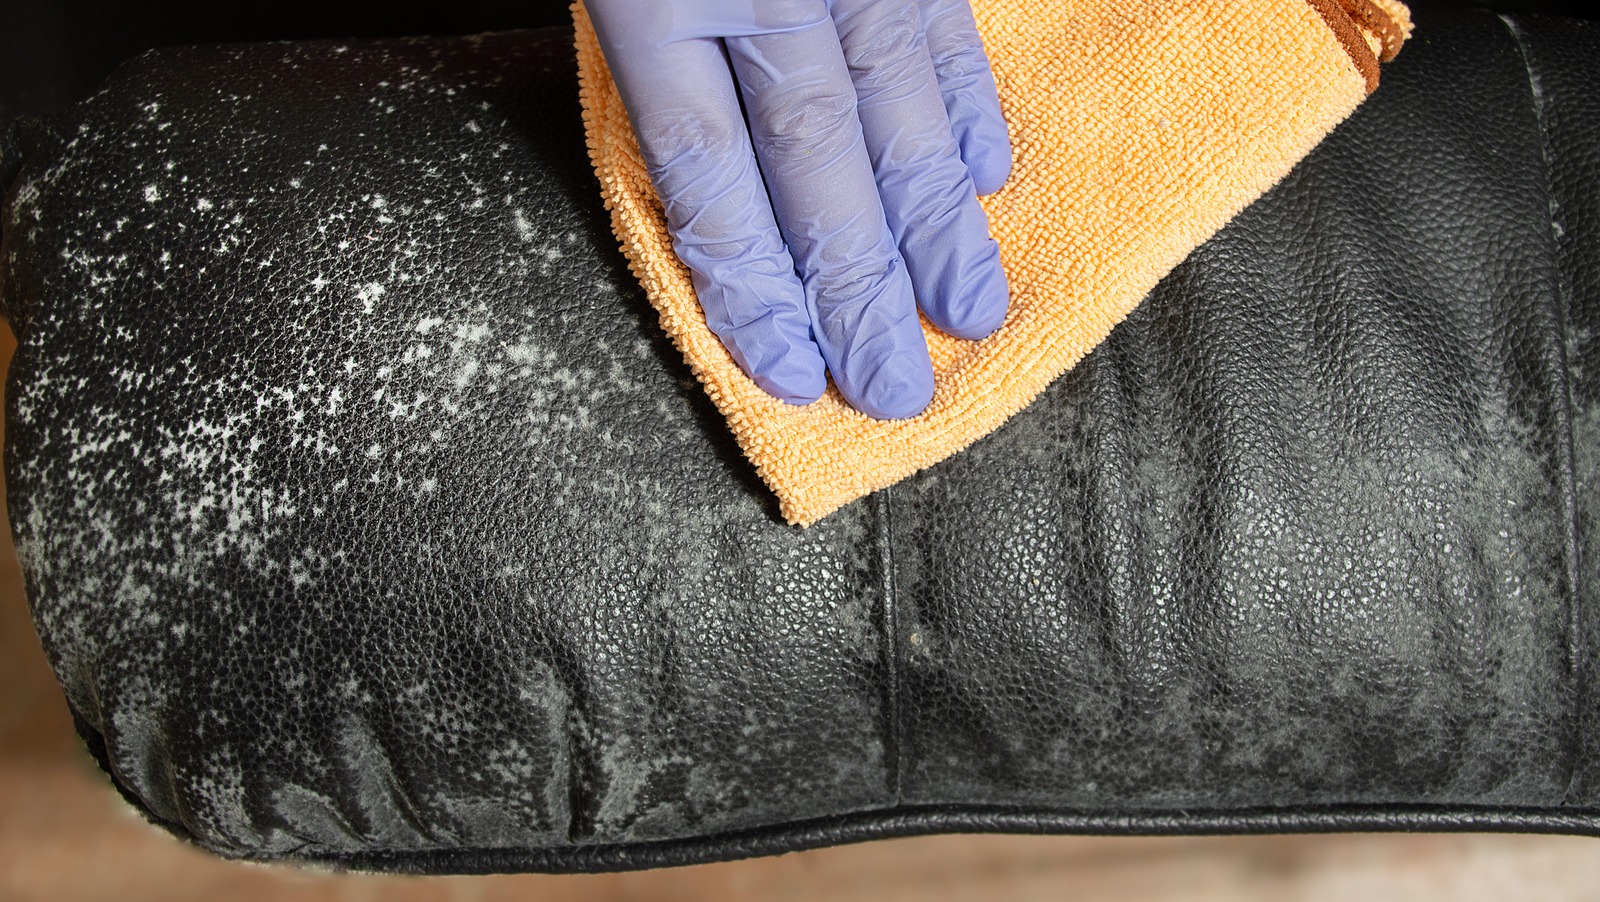 How to Clean Leather Furniture - Advice from Bob Vila